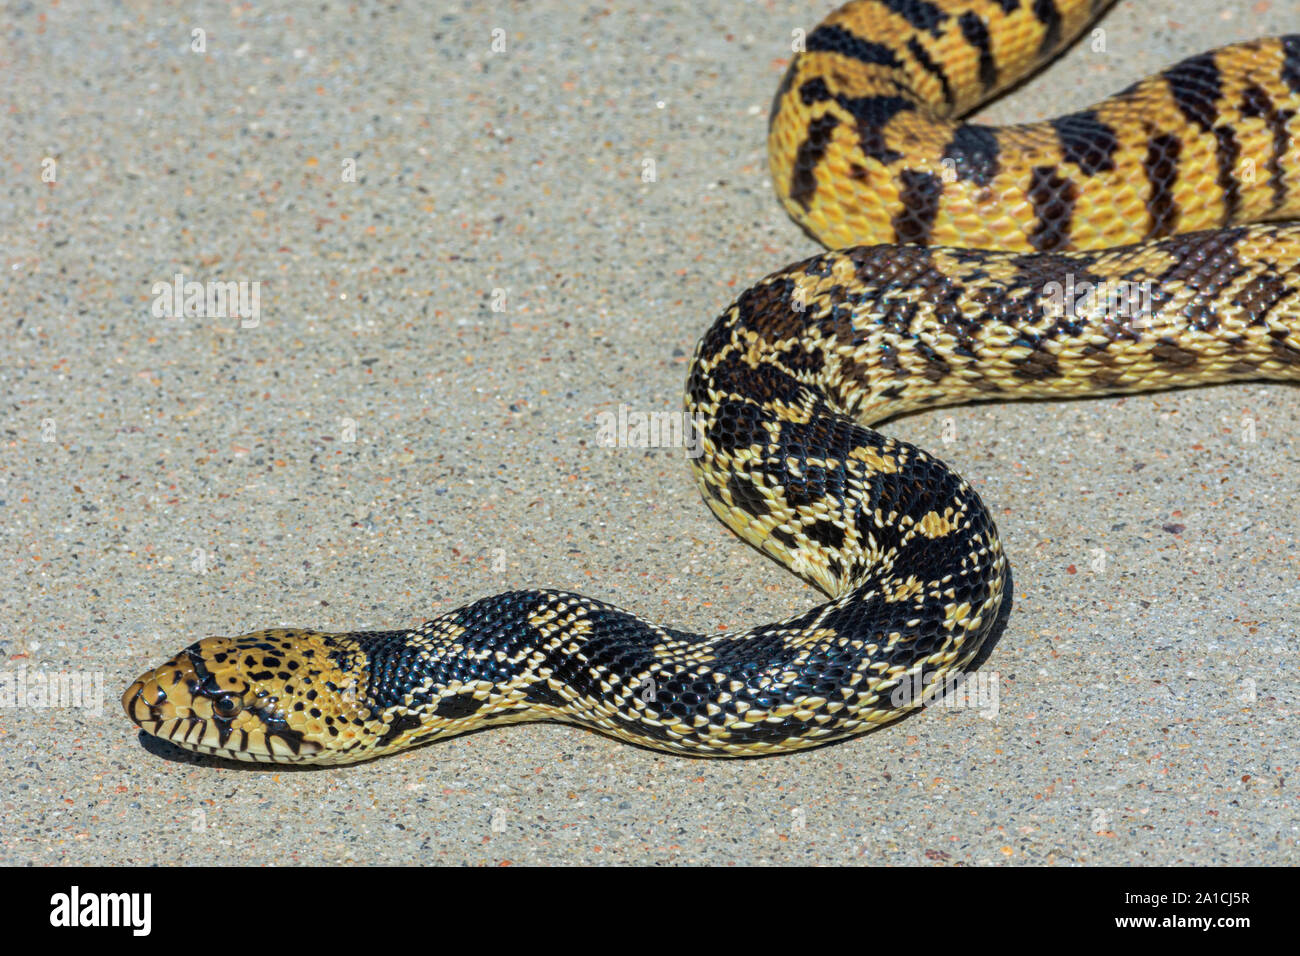 Bullsnake (Pituophis catenifer sayi), currently considered a subspecies of the look-a-like Gopher snake (Pituophis catenifer), Castle Rock CO US. Stock Photo